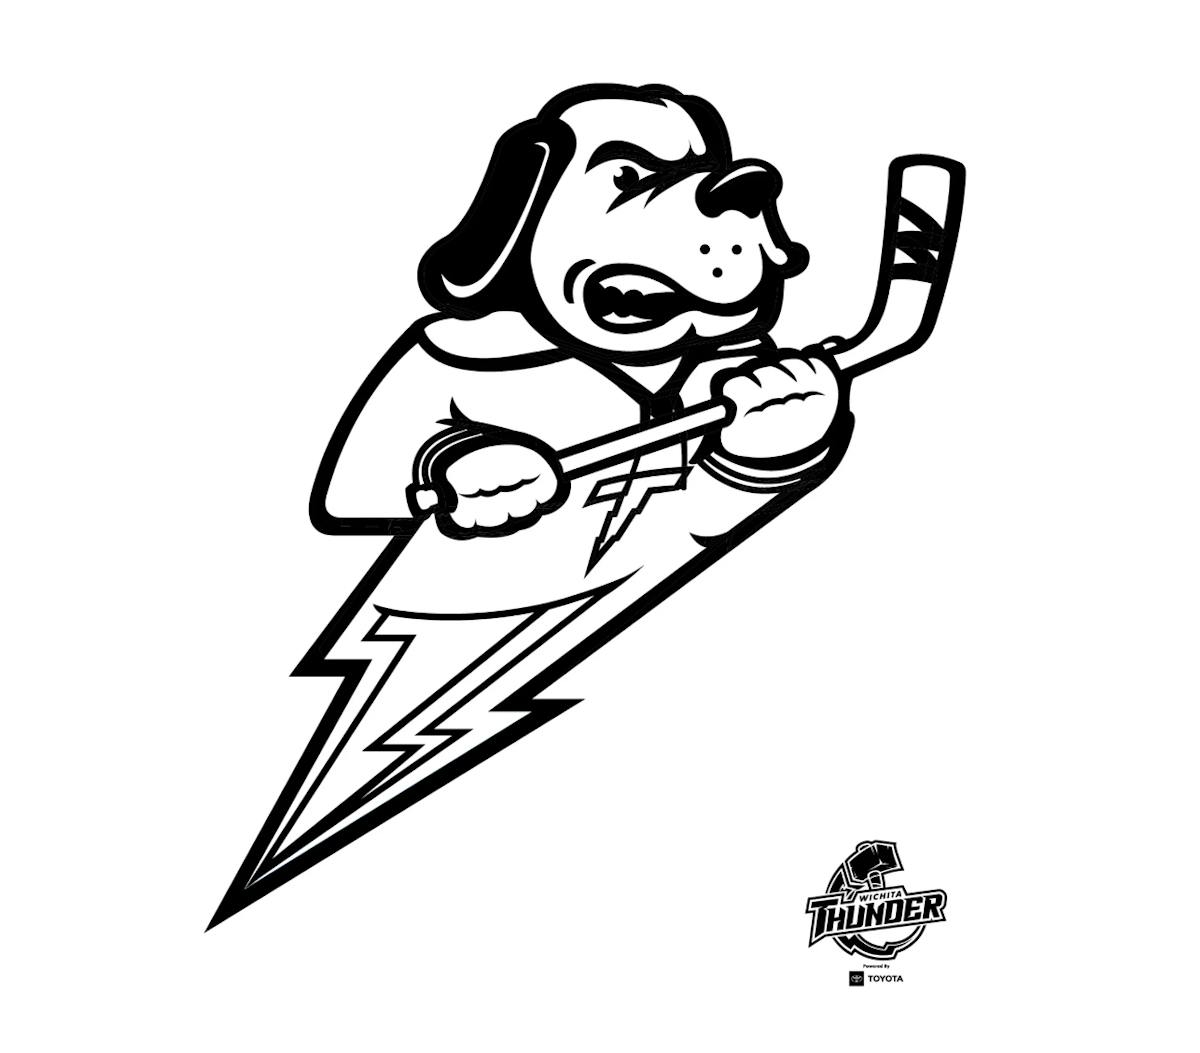 thunder-dog-coloring-64cee355a5e89.png